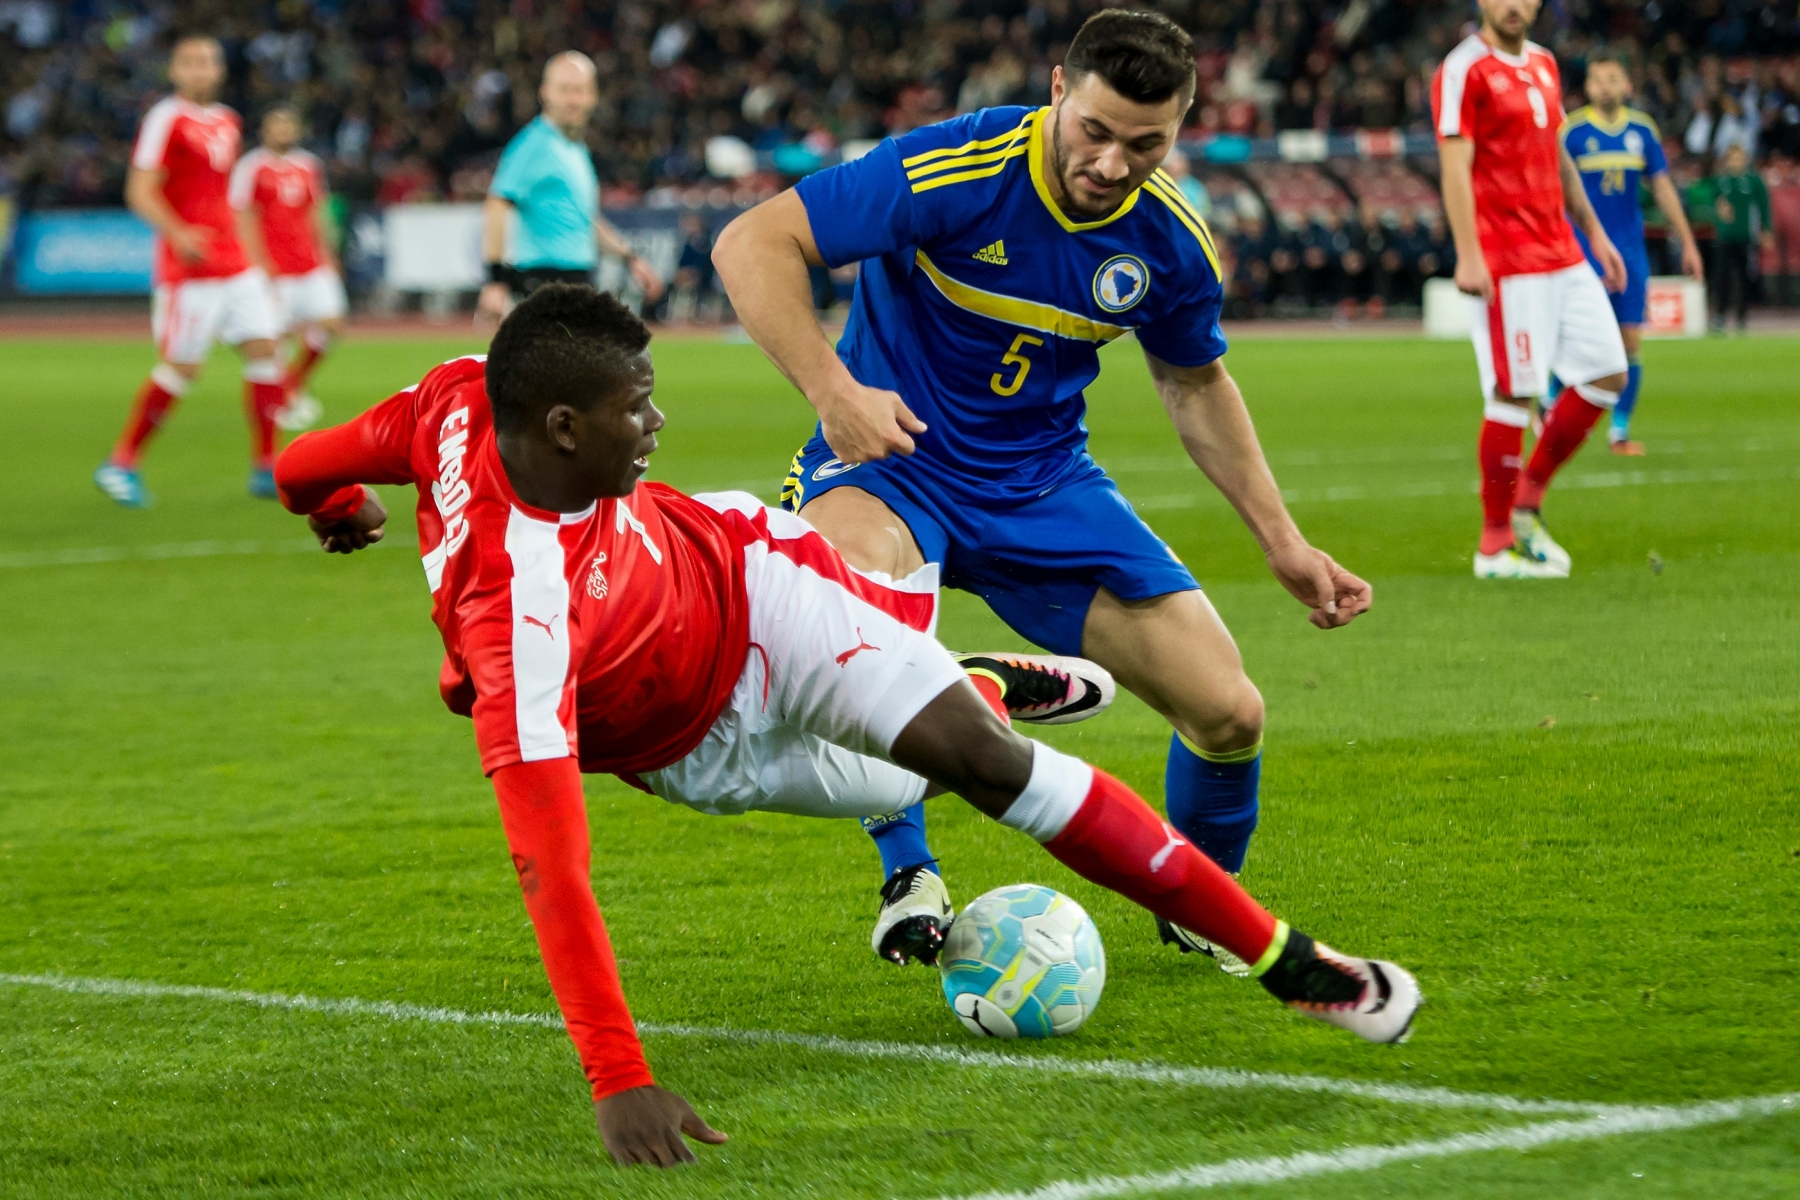 Swiss forward Breel Embolo, left, fights for the ball with Bosnia-Herzegovina's defender Sead Kolasinac, right, during the friendly soccer match between Switzerland and Bosnia and Herzegovina at the Letzigrund stadium in Zuerich, Switzerland, Tuesday, March 29, 2016. (KEYSTONE/Jean-Christophe Bott) SOCCER SWITZERLAND BOSNIA AND HERZEGOWINA